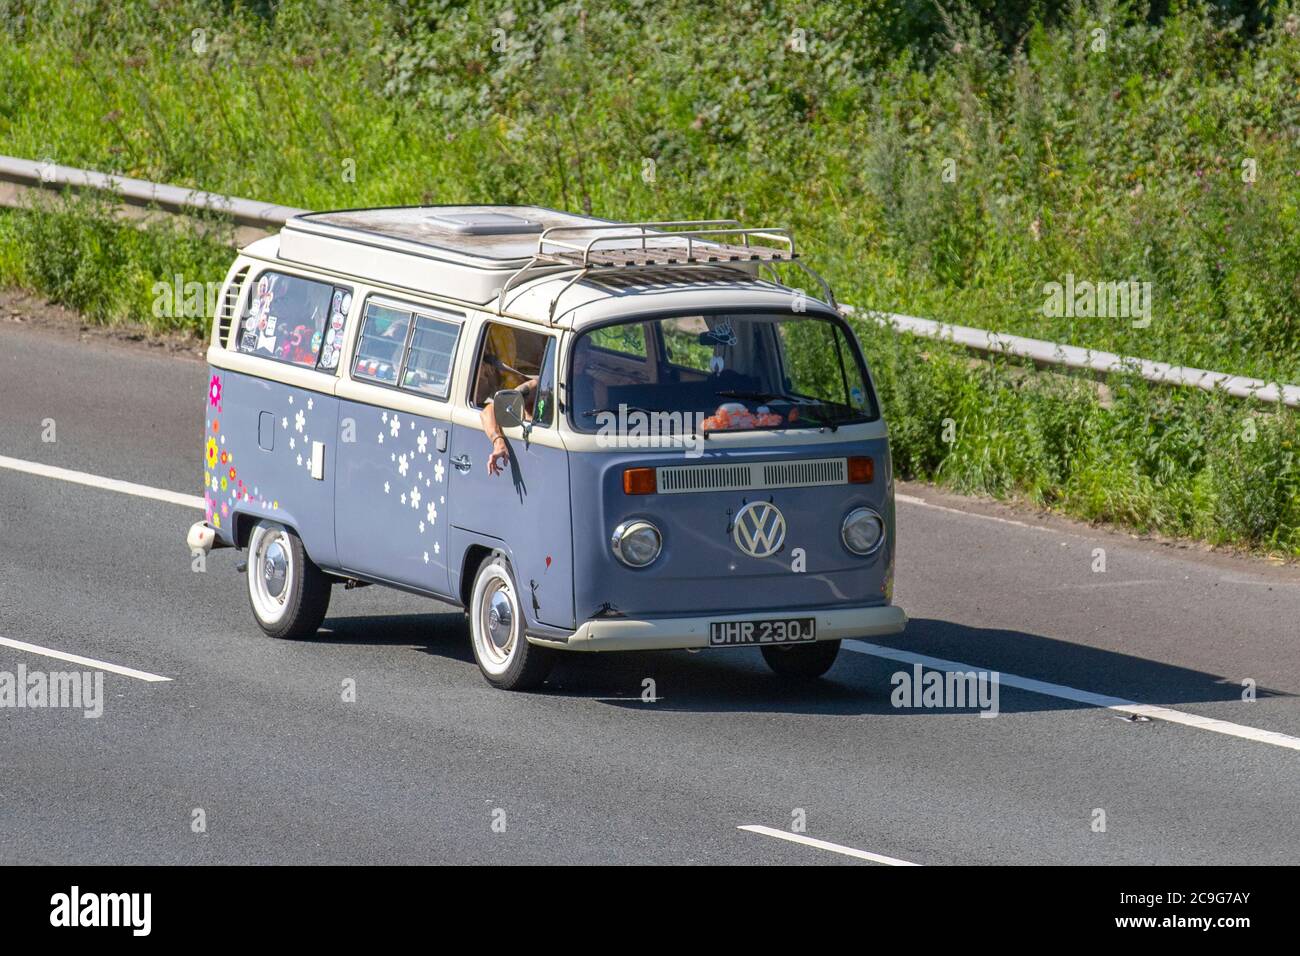 1971 70s seventies VW Volkswagen Microbus 8 Seater; Touring Caravans and Motorhomes, campervans on Britain's roads, RV leisure vehicle, family holidays, caravanette vacations, caravan holiday, van conversions, autohome, 1960s Flower Power, motorhome on the road UK Stock Photo